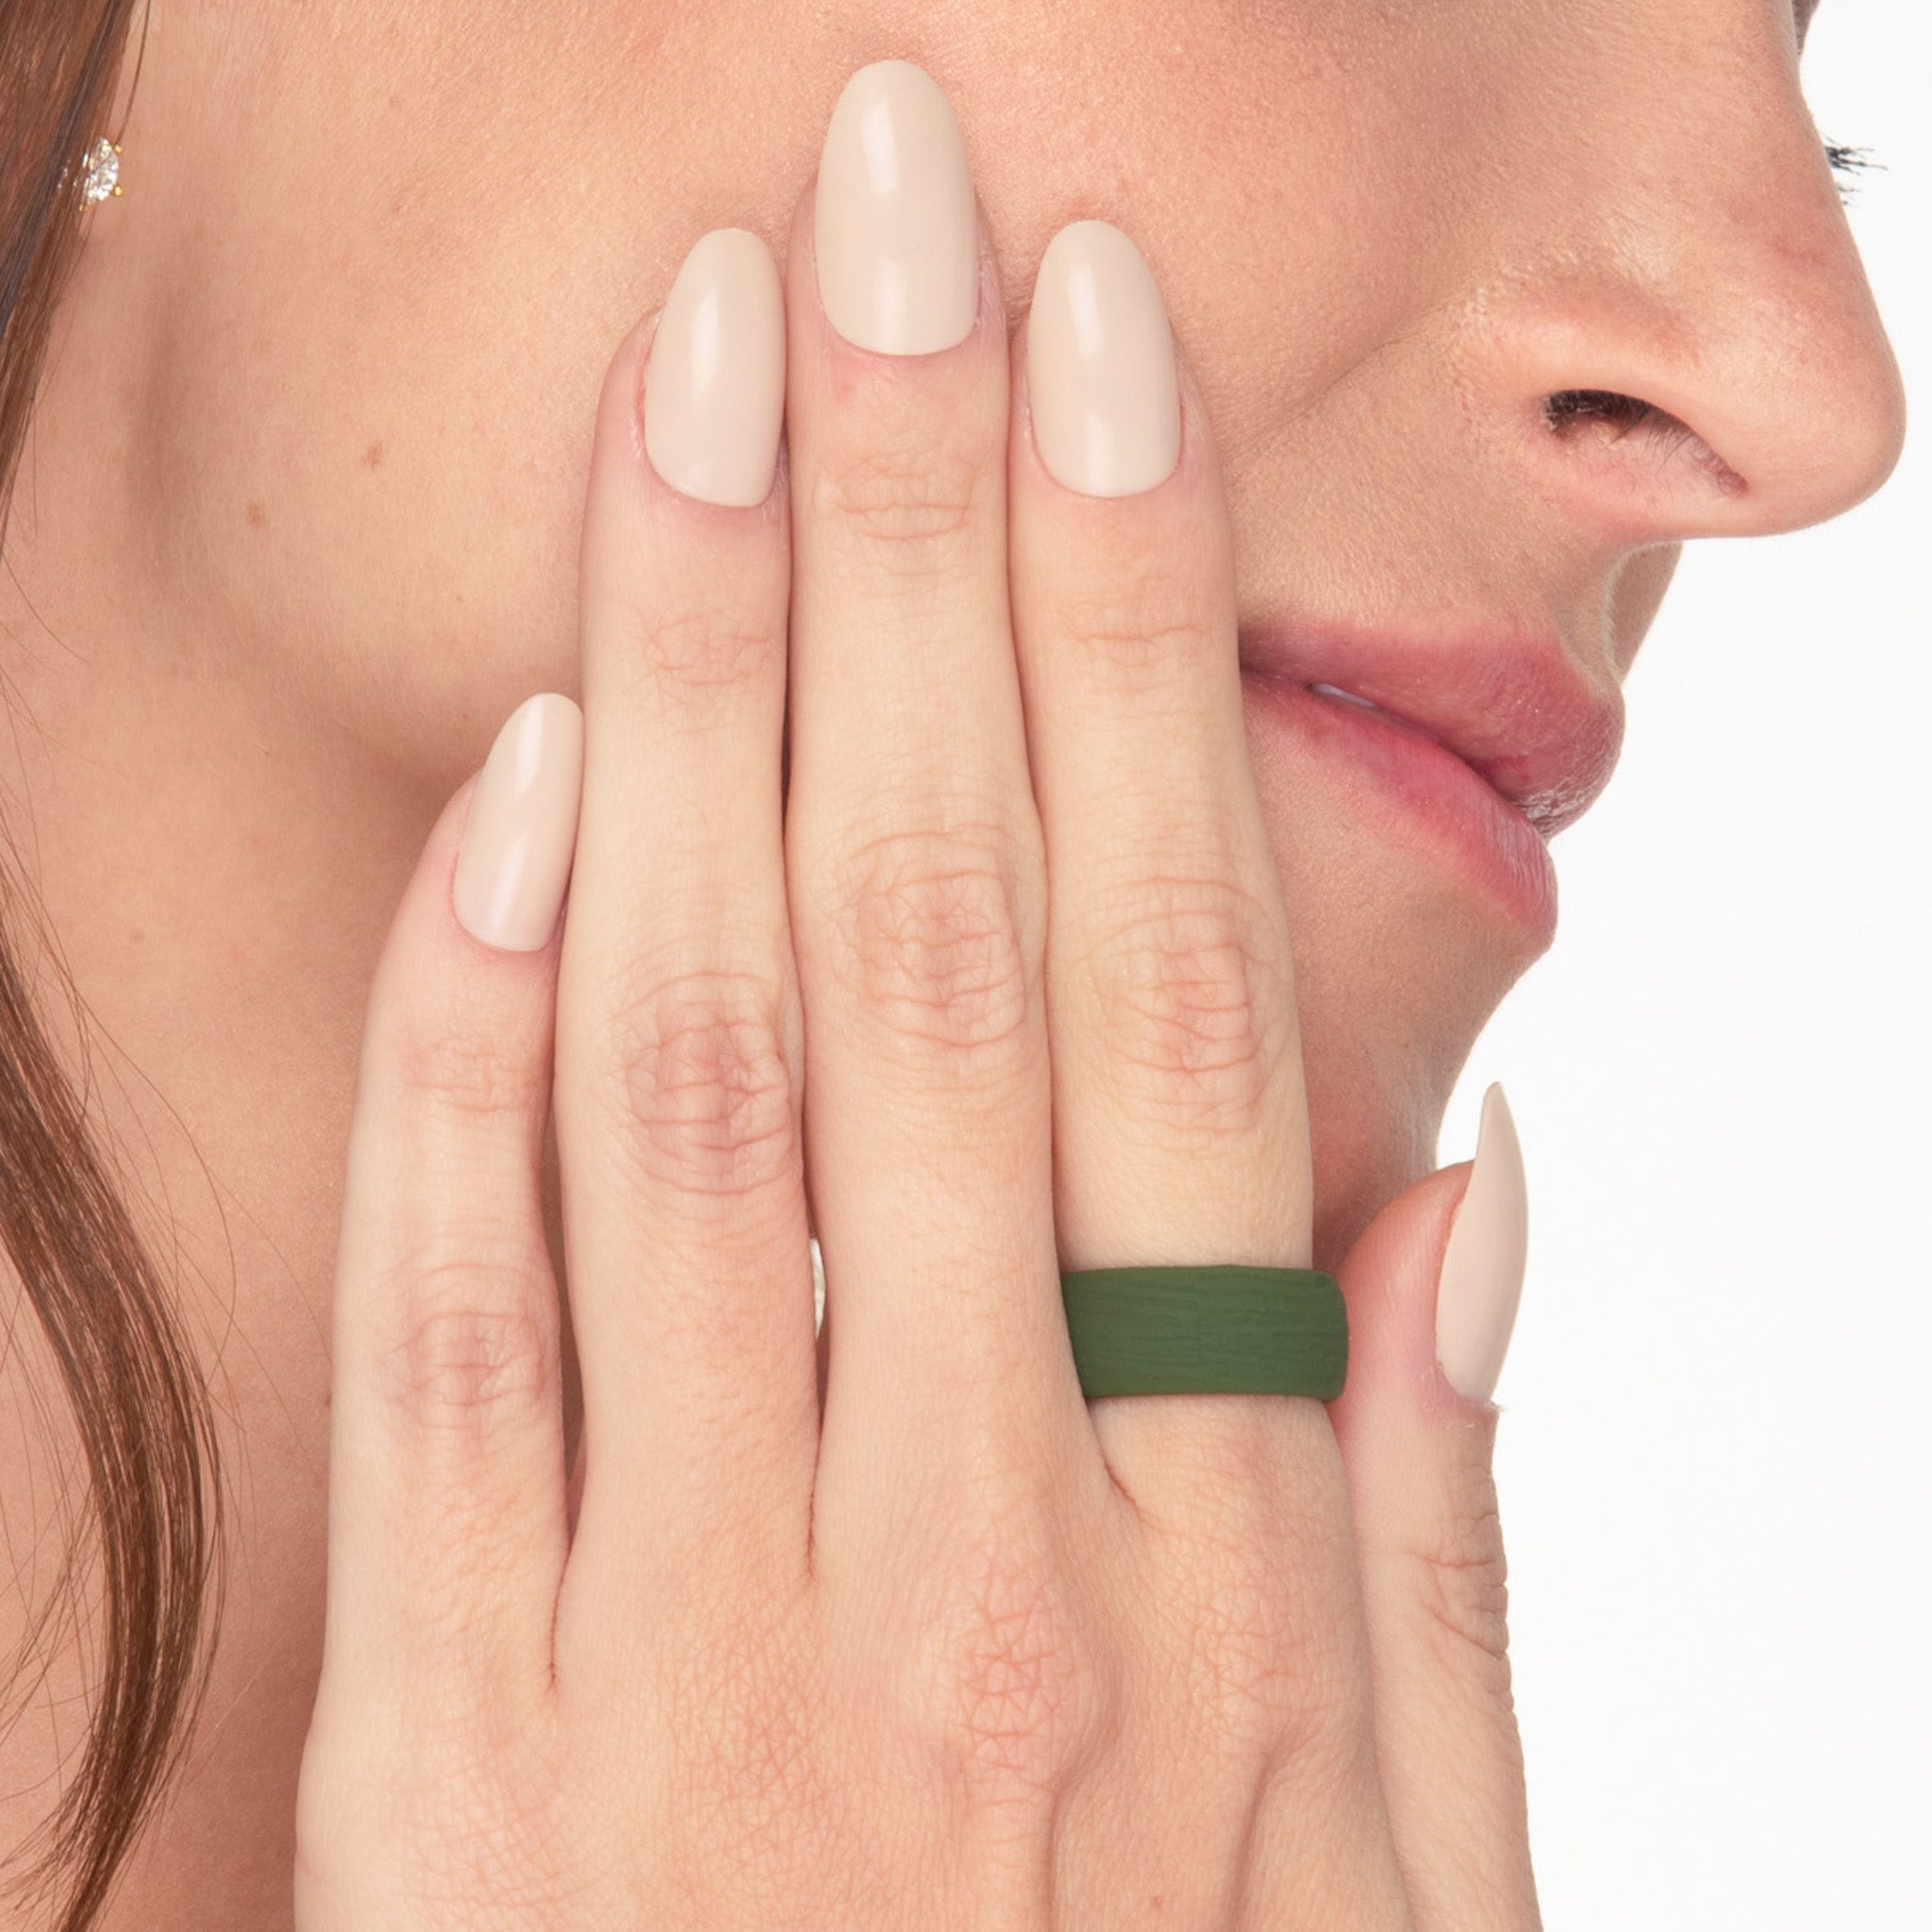 The Fern - Silicone Ring